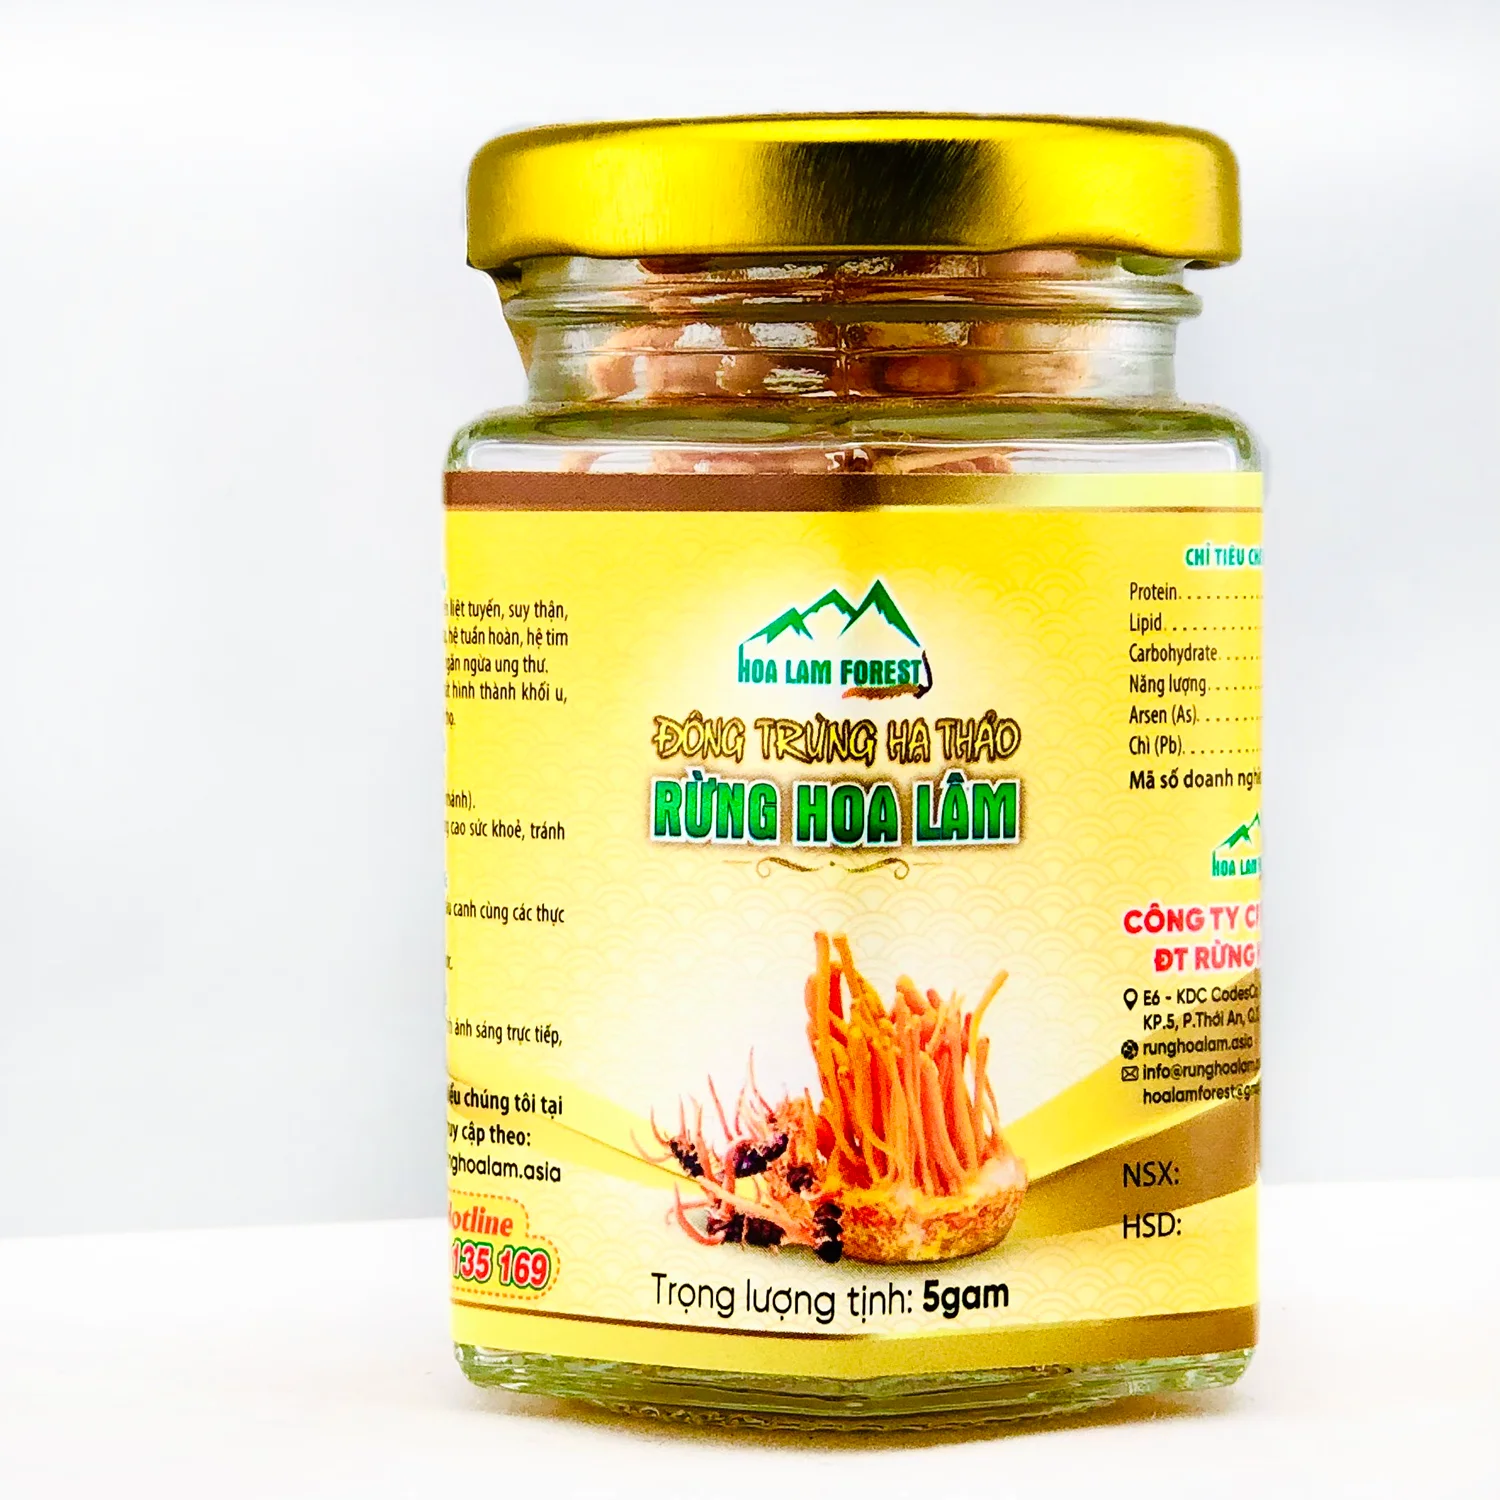 Cordyceps Militaris  Healthy Product 100% Natural Herbal High Quality Product Good For Health Providing Energy OEM Private Label